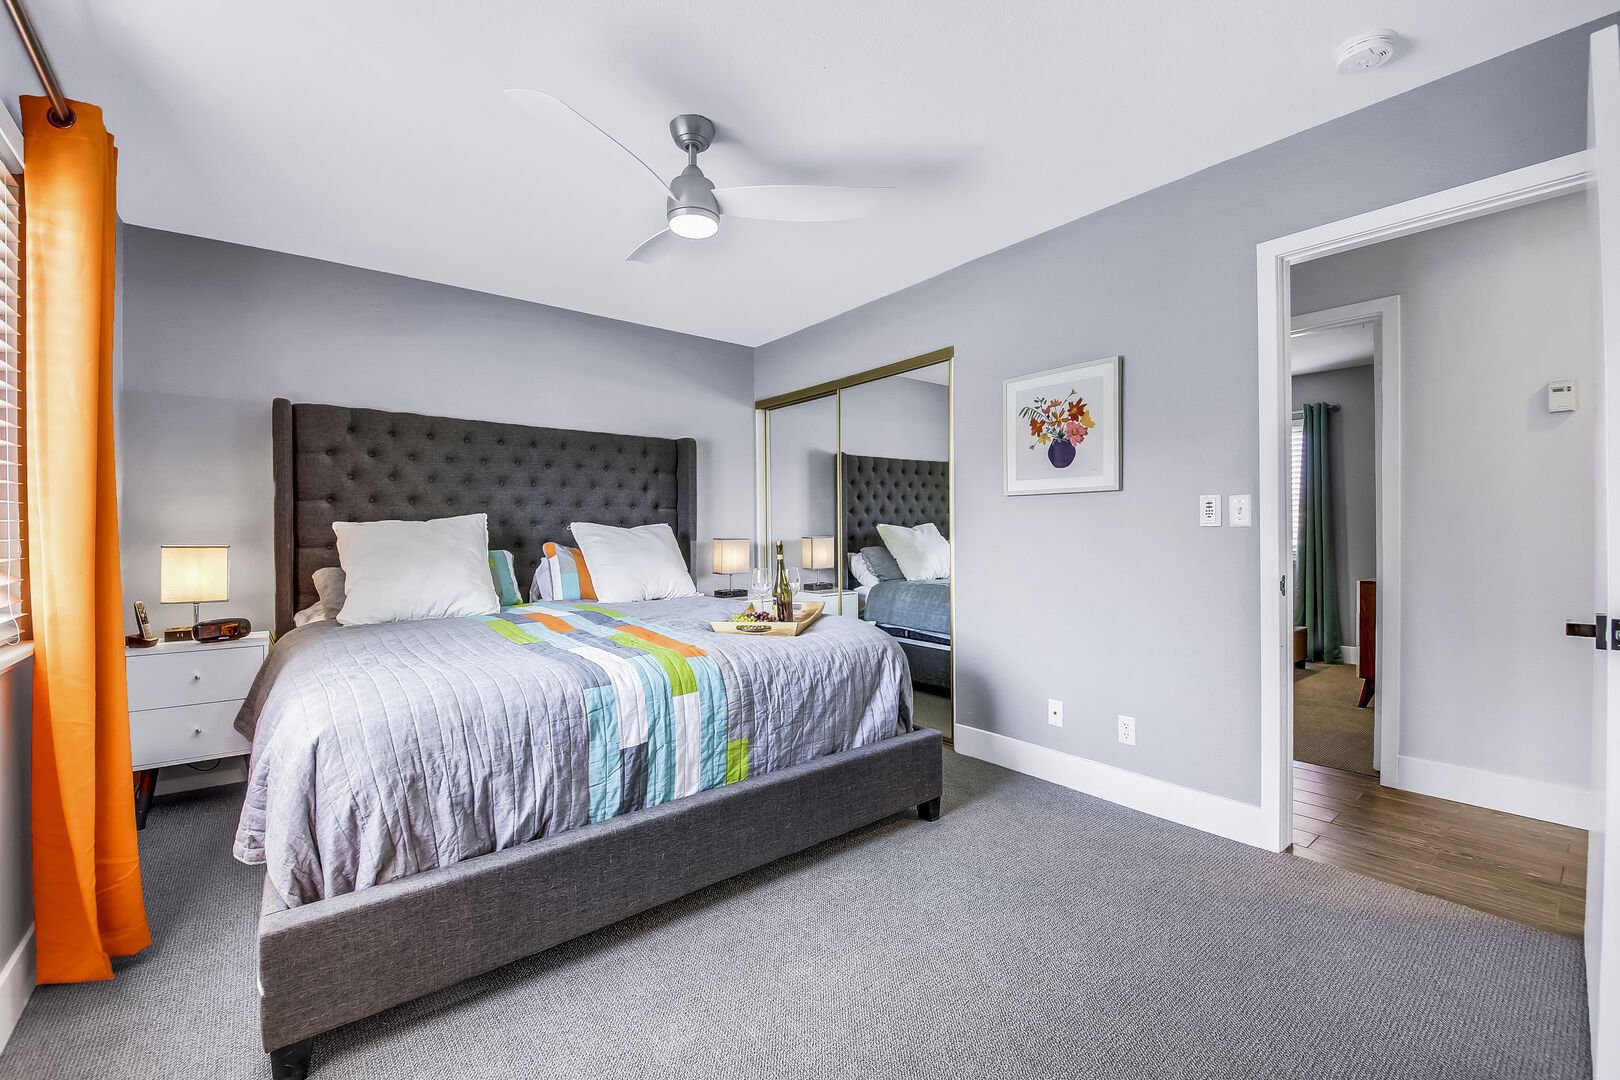 Master Suite 1 features a remote-controlled ceiling fan and  large reach-in closet.